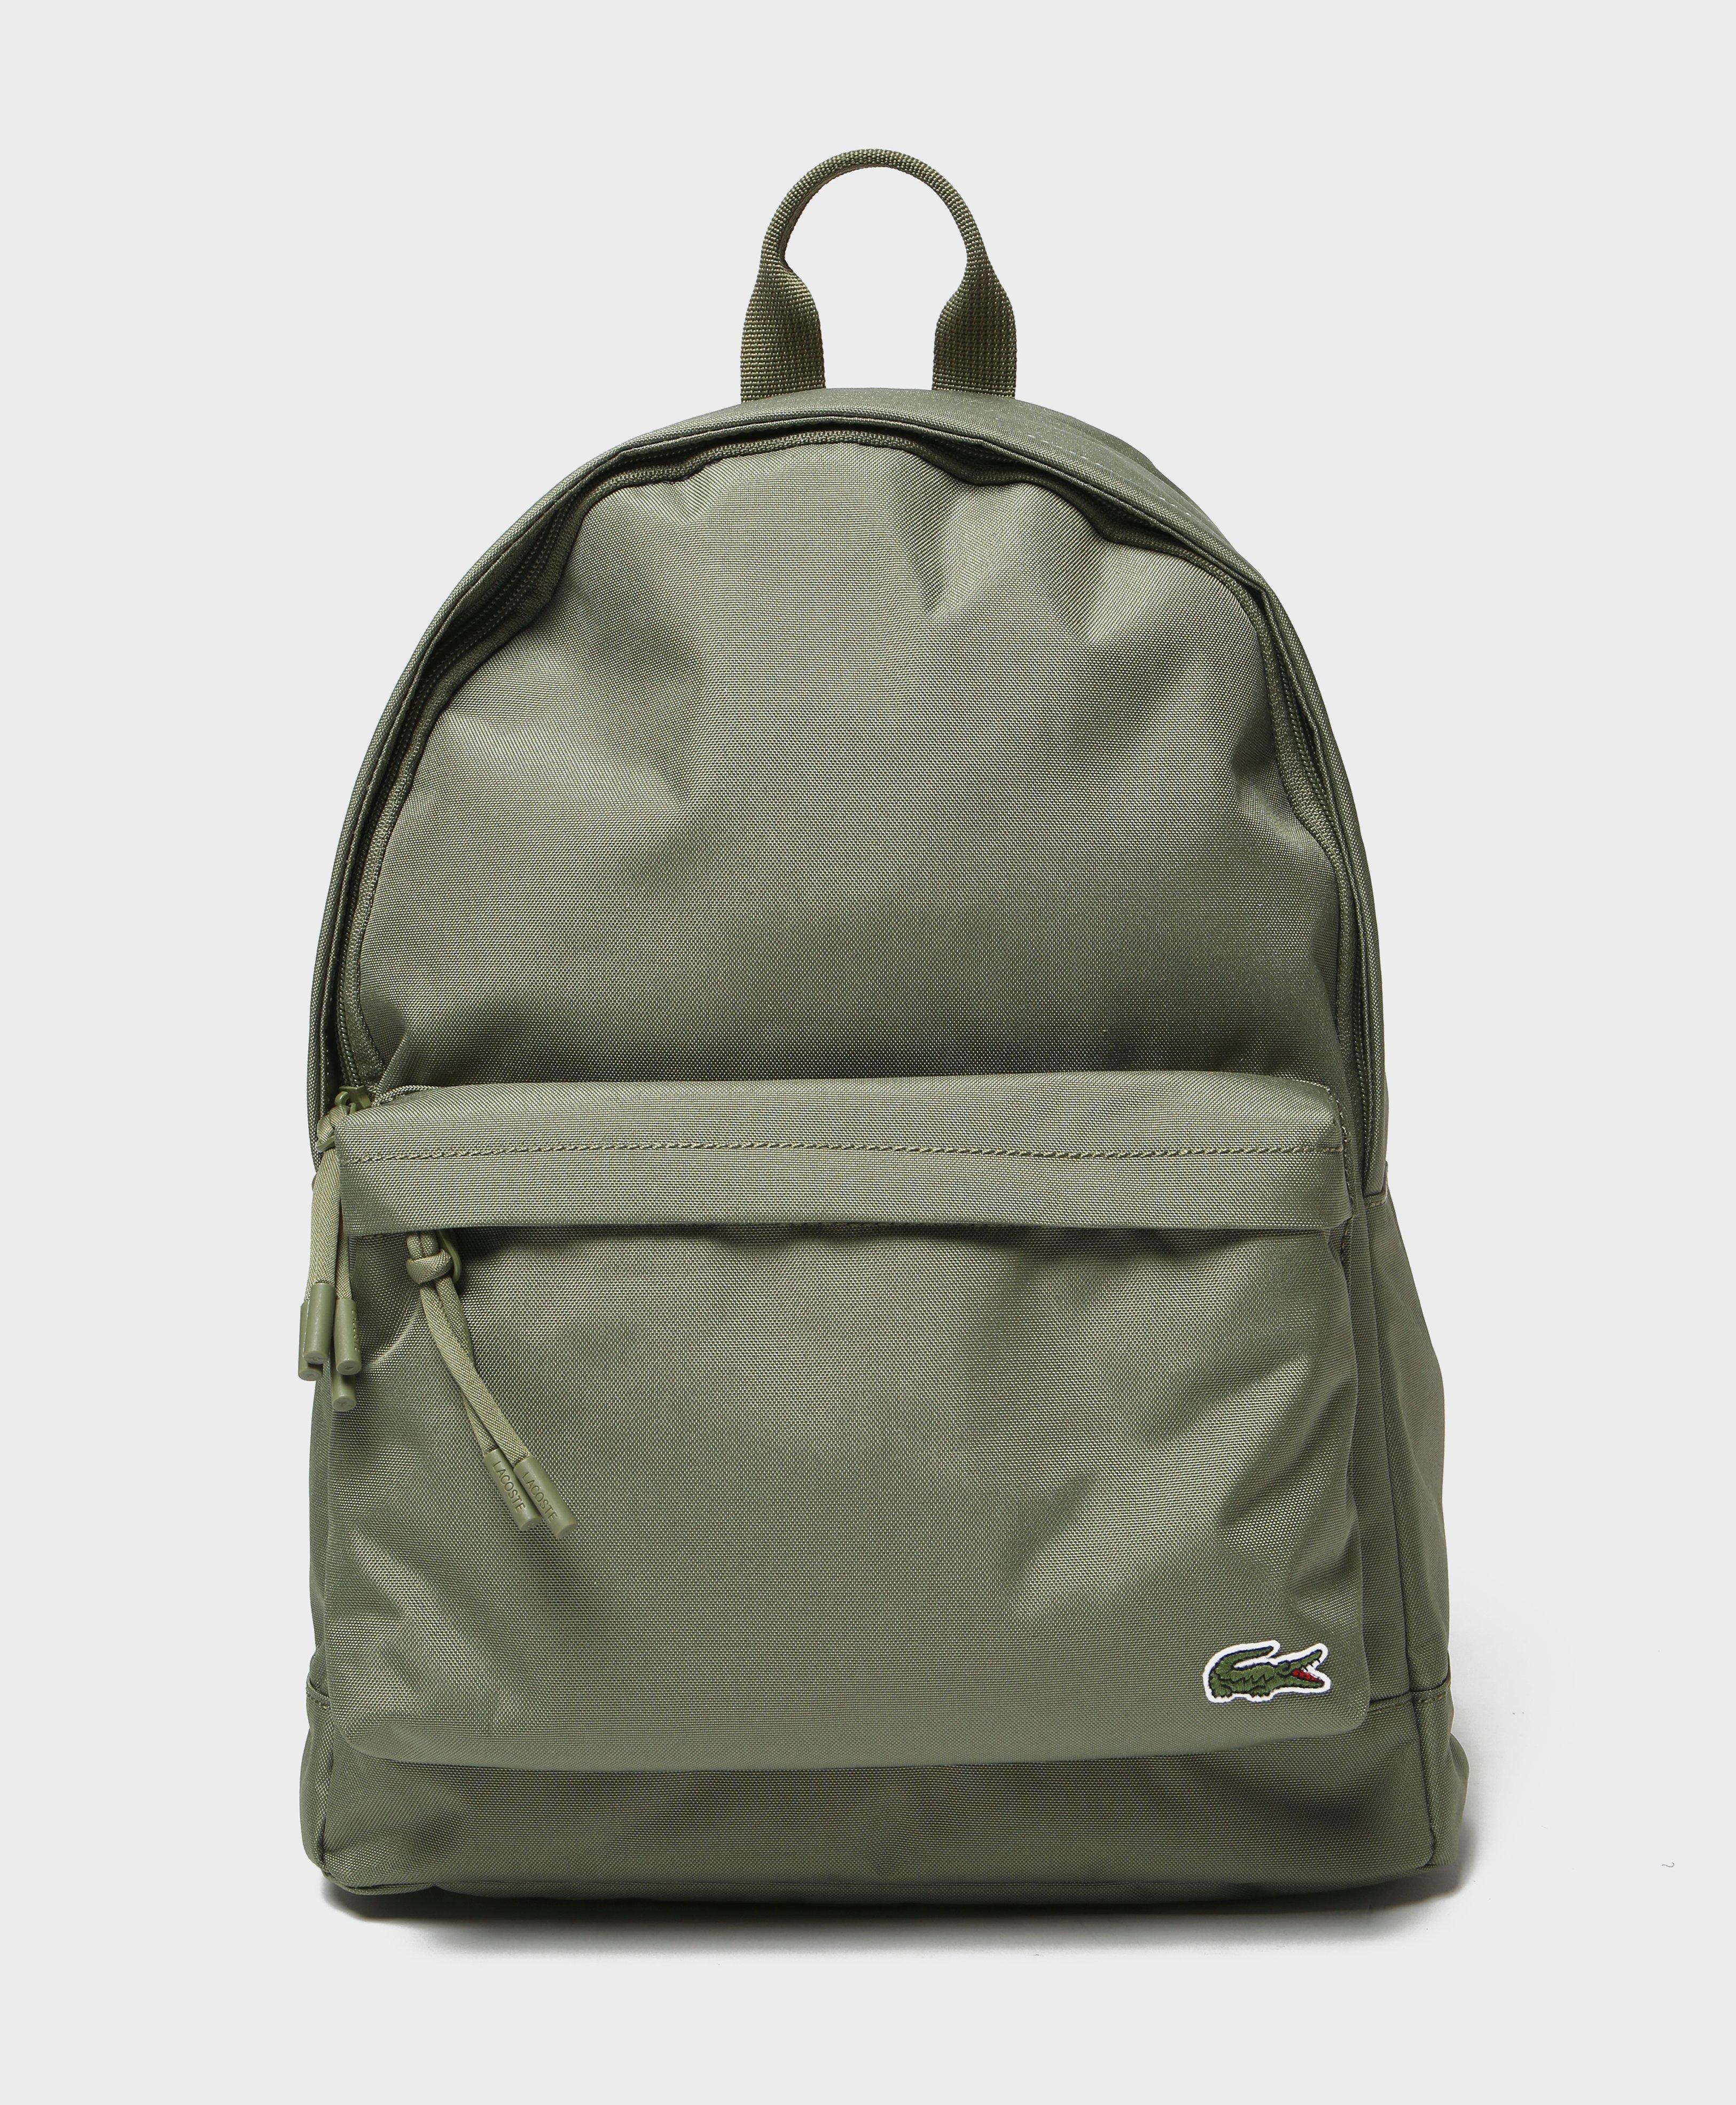 lacoste backpack green off 76% - online 